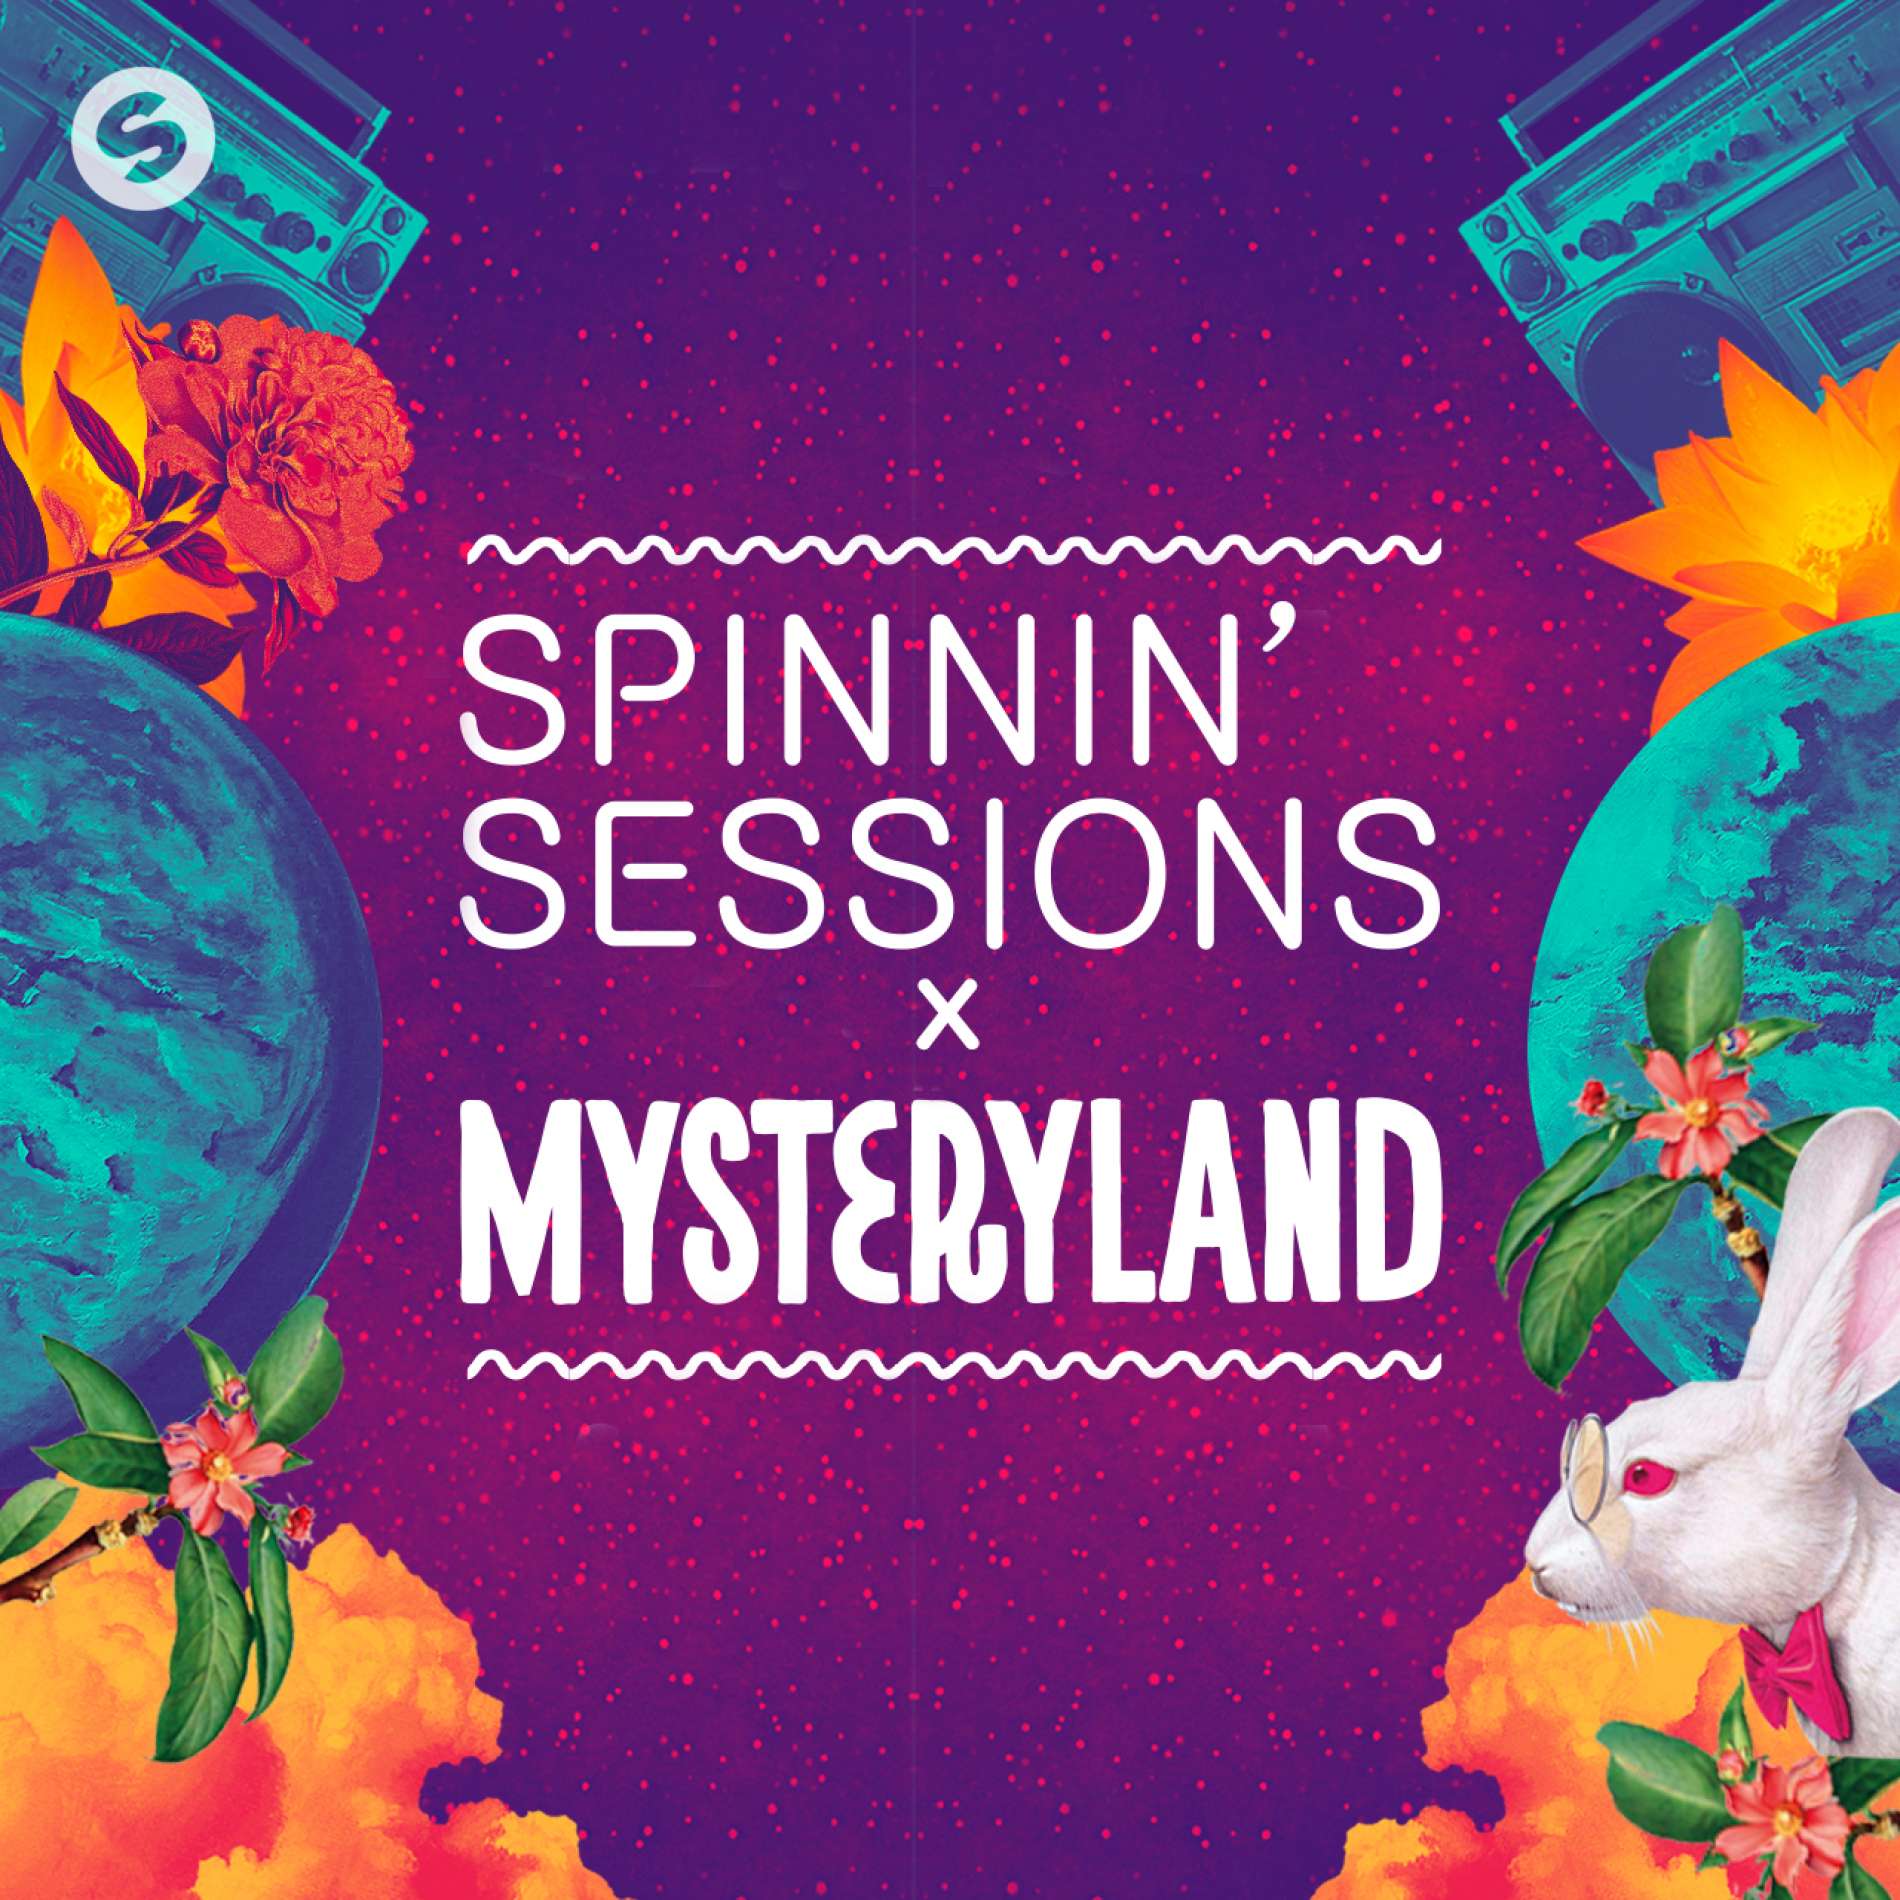 Spinnin' Sessions meets Mysteryland!